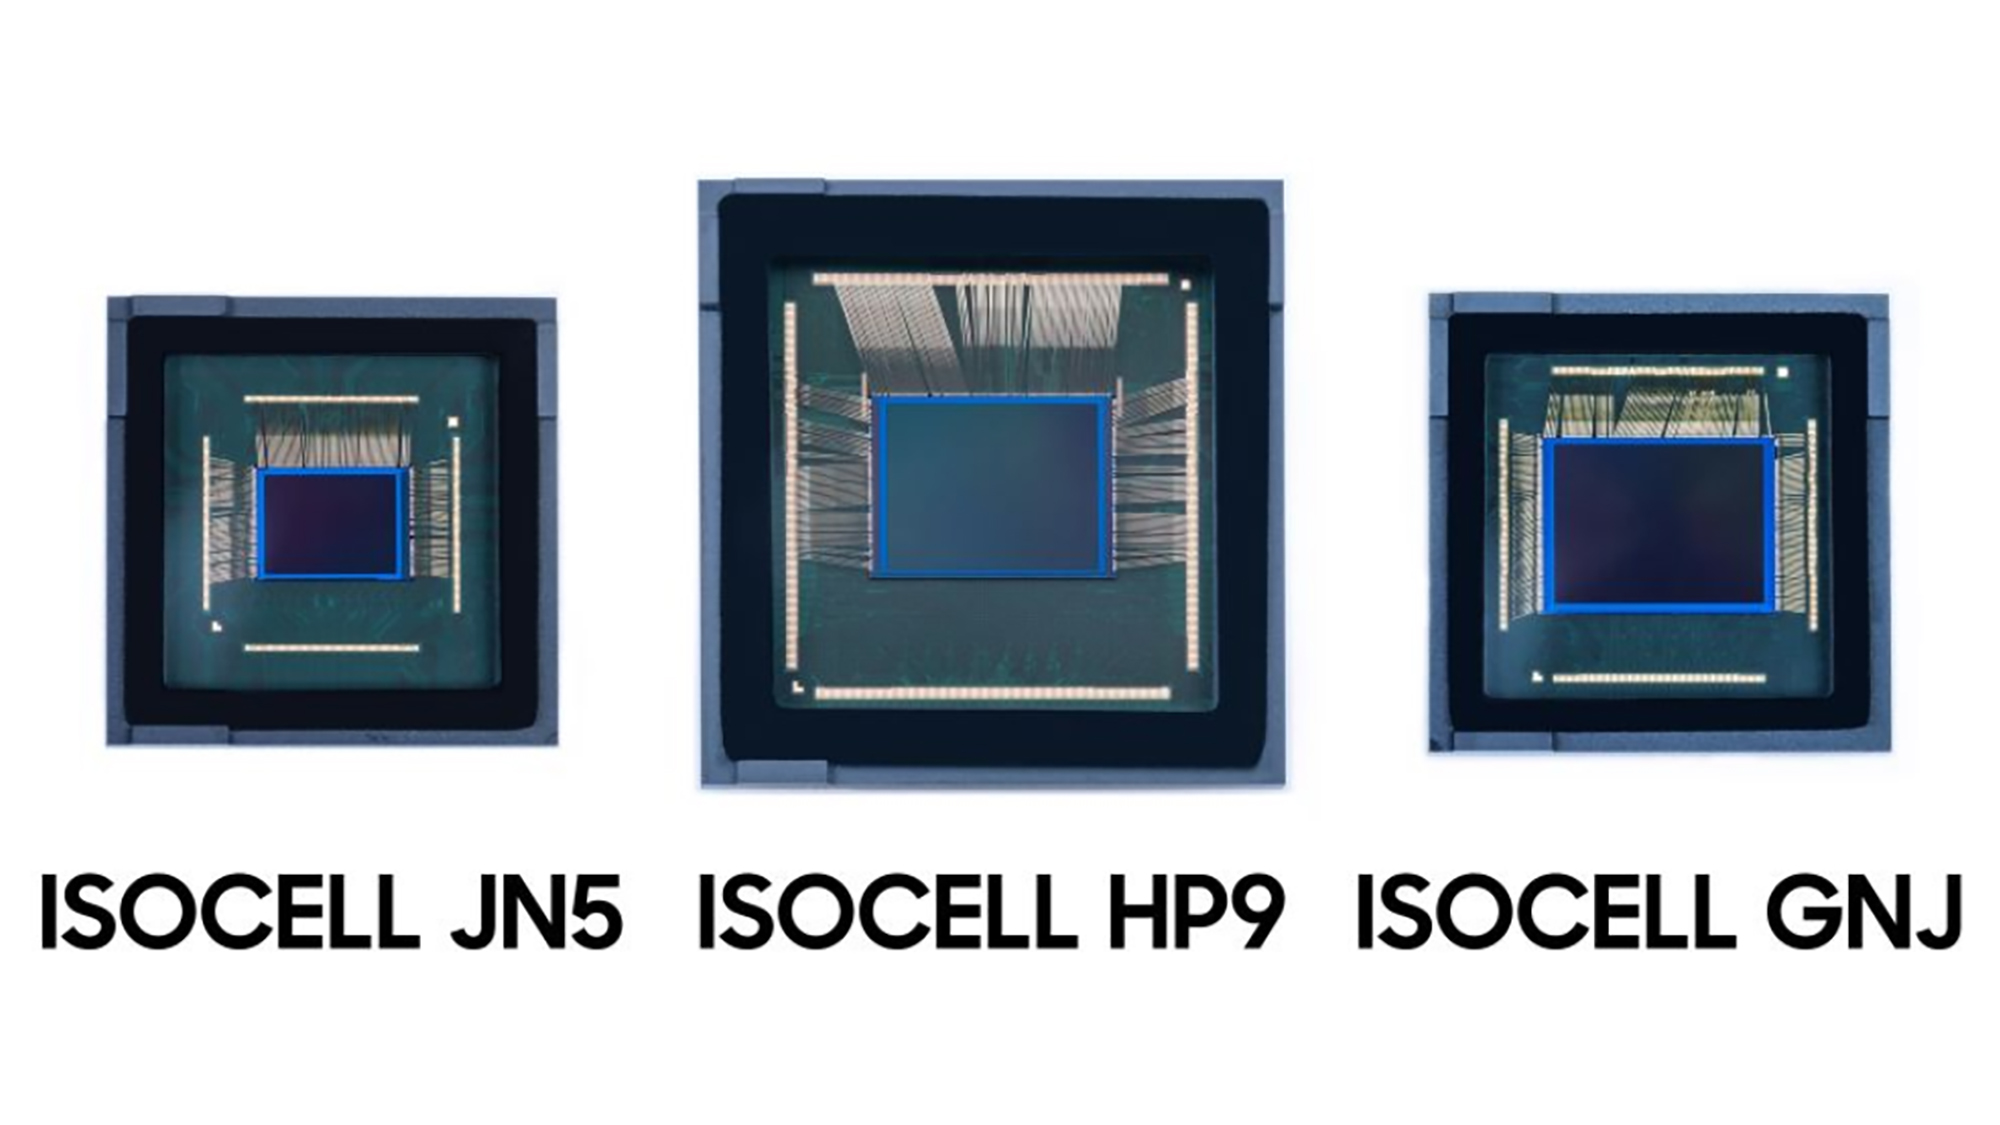 Samsung ISOCELL H9, ISOCELL JN5, ISOCELL GNJ camera lenses